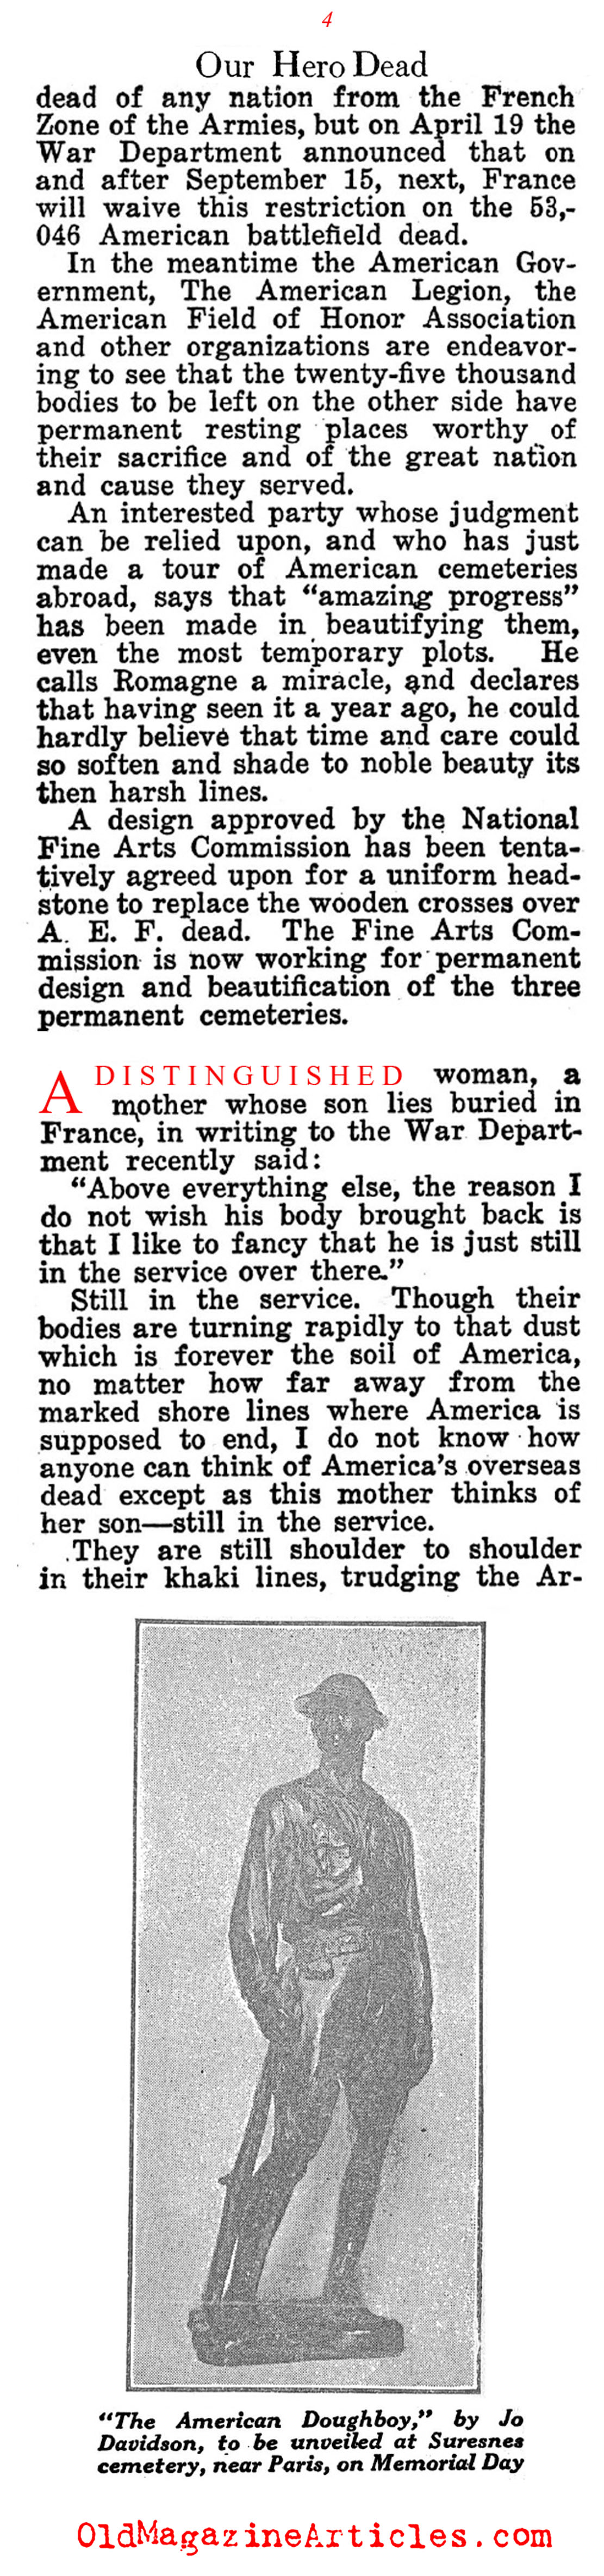 U.S. Cemeteries: A Flag for Every Grave (American Legion Weekly, 1920)